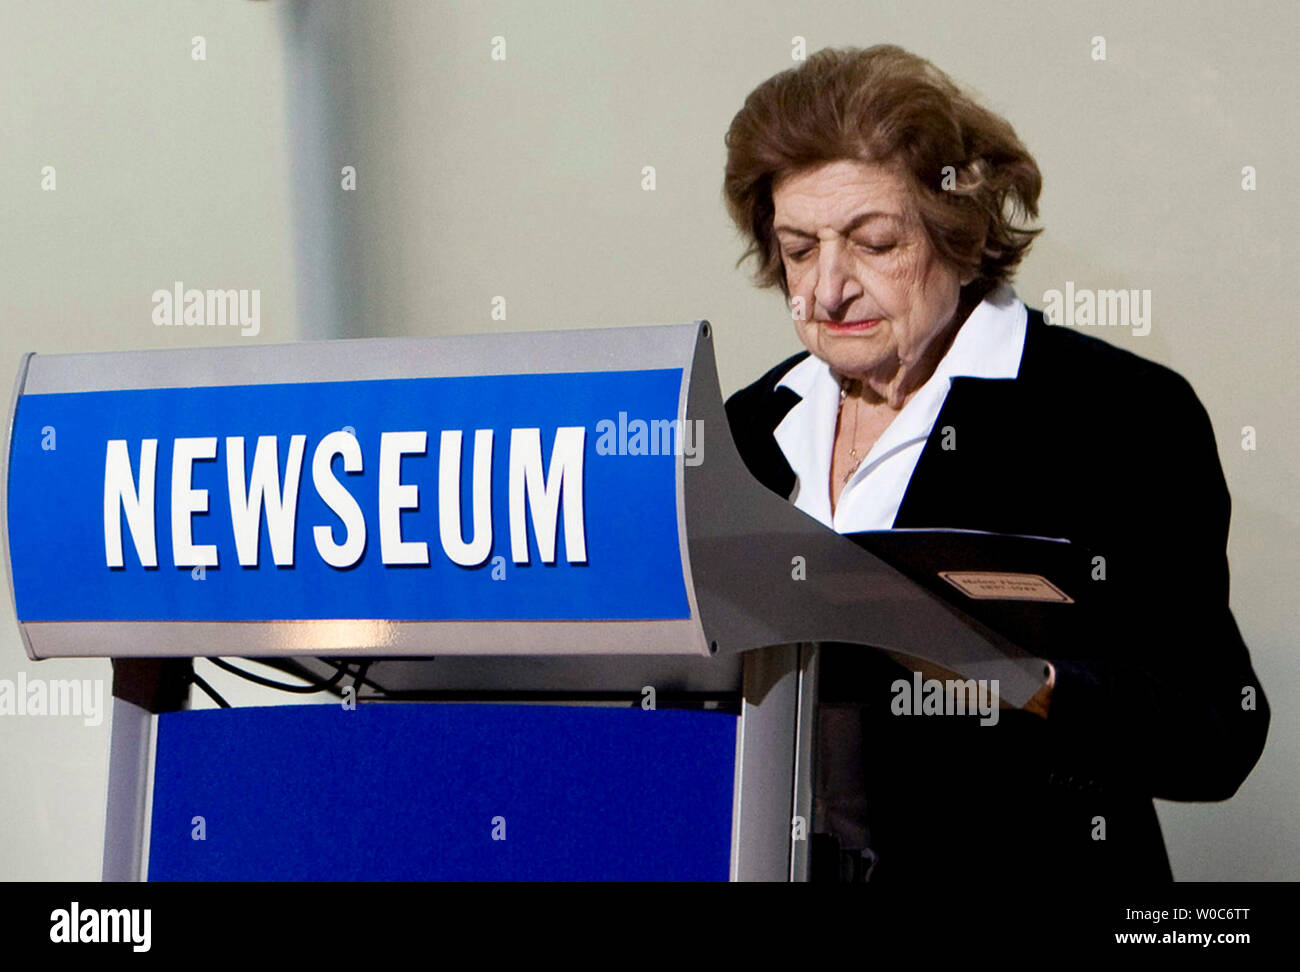 Helen Thomas of Hearst News Service speaks at the dedication of the Journalists Memorial that honors journalists who died or were killed in the pursuit of news at The Newseum on April 4, 2008 in Washington.  The Journalists Memorial bears the names of 1,843 reporters, editors, photographers, broadcasters and executives from around the world who died or were killed while covering wars, civil violence or natural disasters, or were killed because of their work since 1837.  (UPI Photo/Patrick D. McDermott) Stock Photo